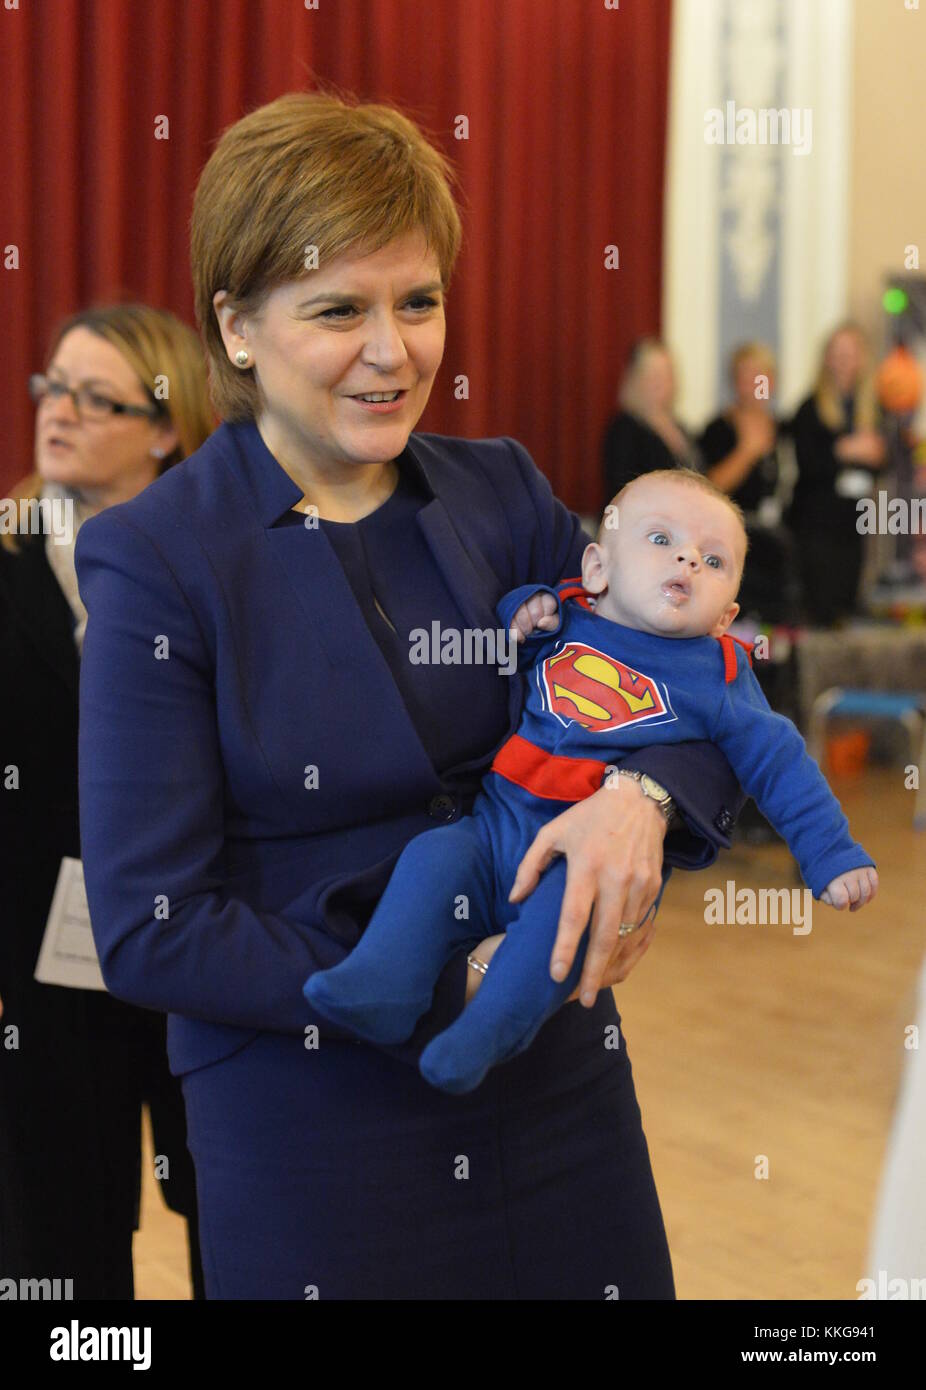 Scotland's First Minister Nicola Sturgeon attends a celebration event to celebrate NHS Tayside having supported more than 1,000 women through Family Nurse Partnership programme at the Caird Hall in Dundee.  Featuring: Nicola Sturgeon Where: Dundee, Scotland, United Kingdom When: 30 Oct 2017 Credit: Euan Cherry/WENN.com Stock Photo